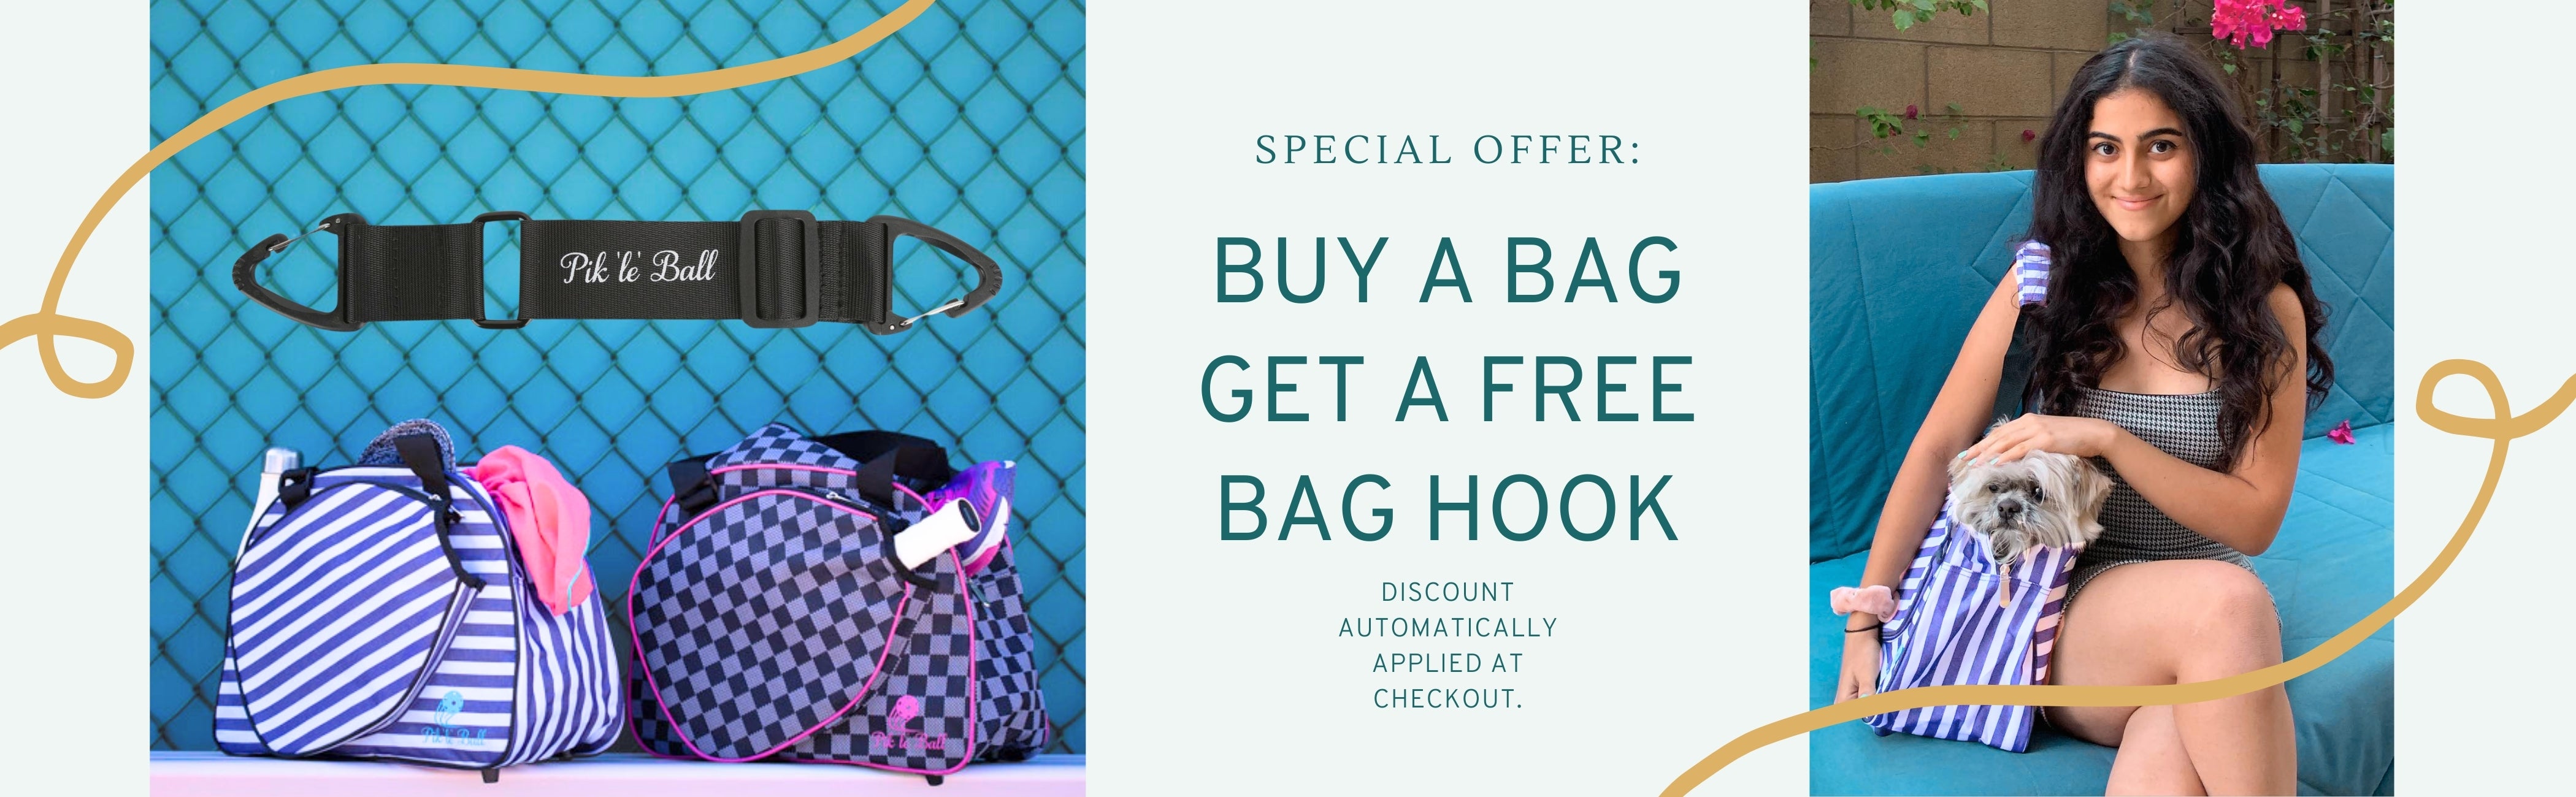 Womens fashionable pickleball bags promotional offer - buy a ladies sports tote get a free bag hook included